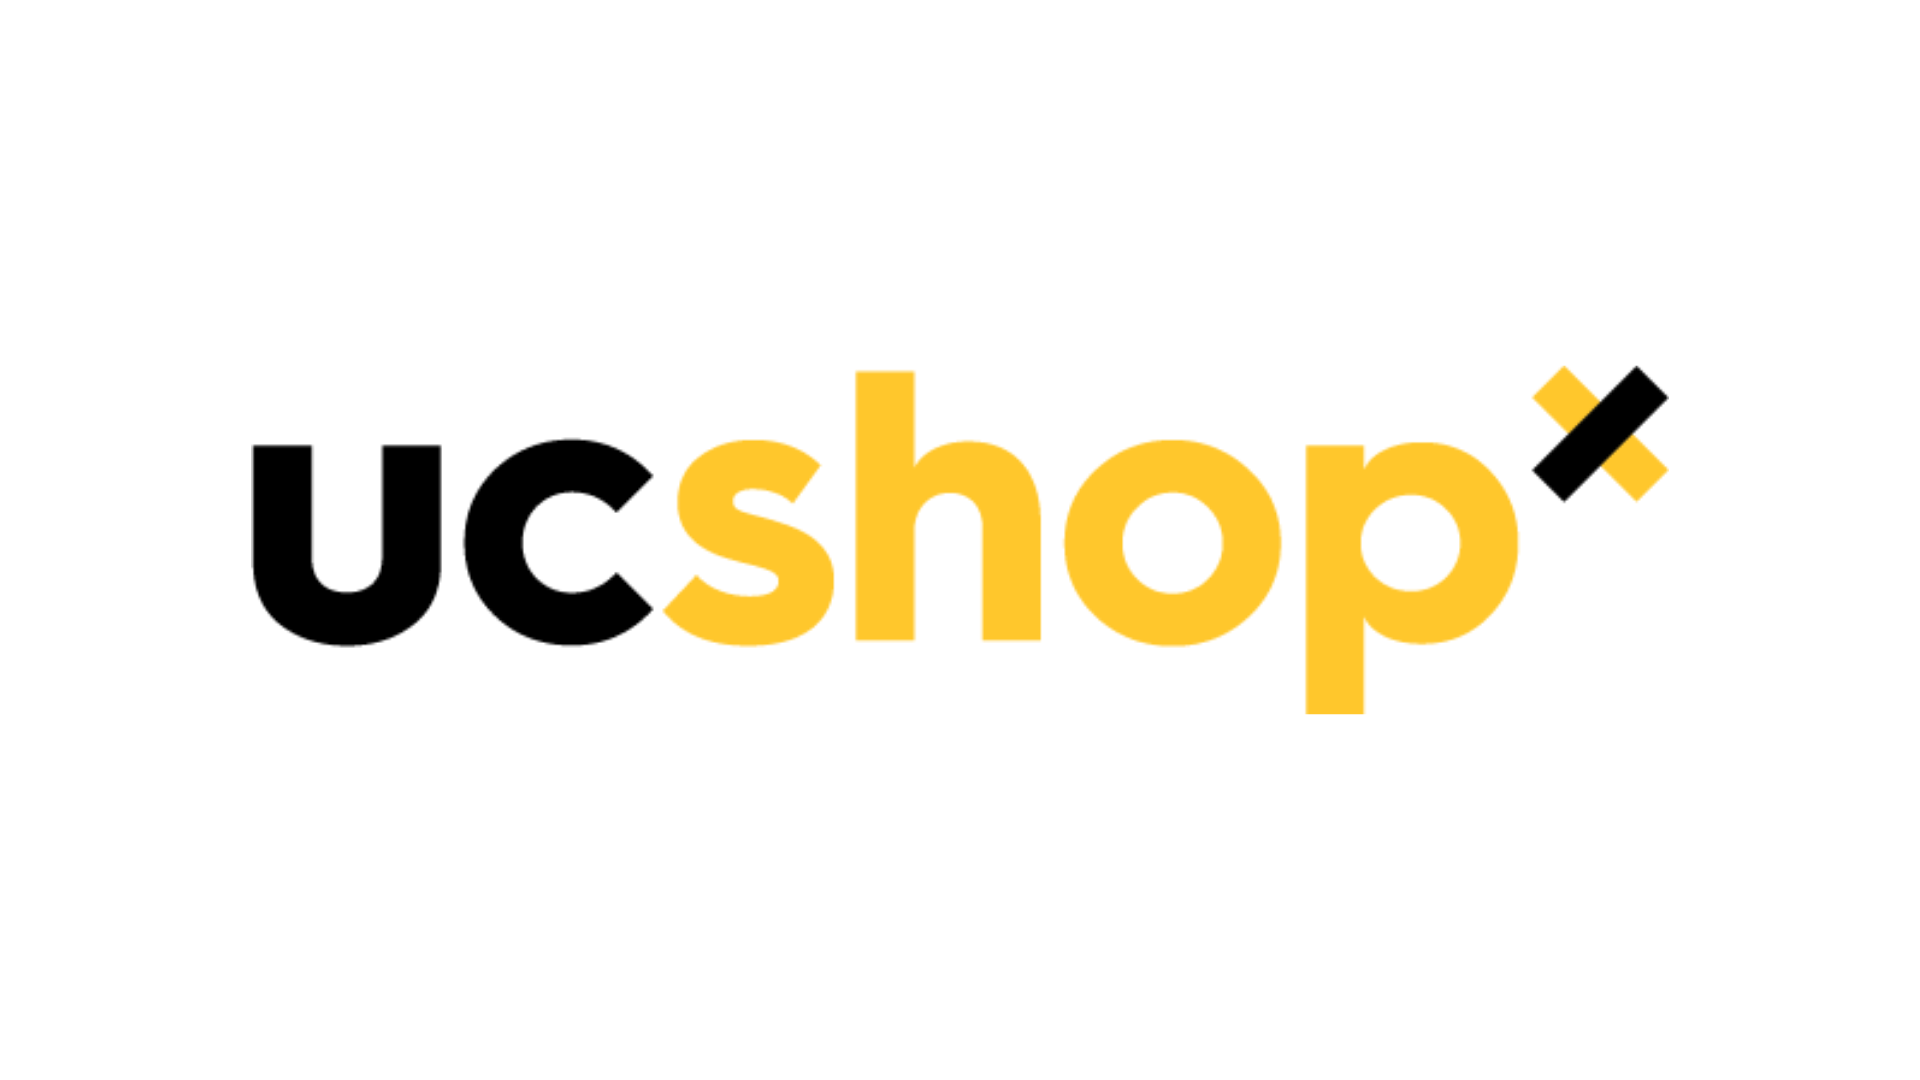 The word 'UCShopx' appears as a logo. The 'UC' portion appears in black while the 'shop' portion appears in yellow. The 'x' is indexed above the 'p' of 'shop' and is both black and yellow.. 